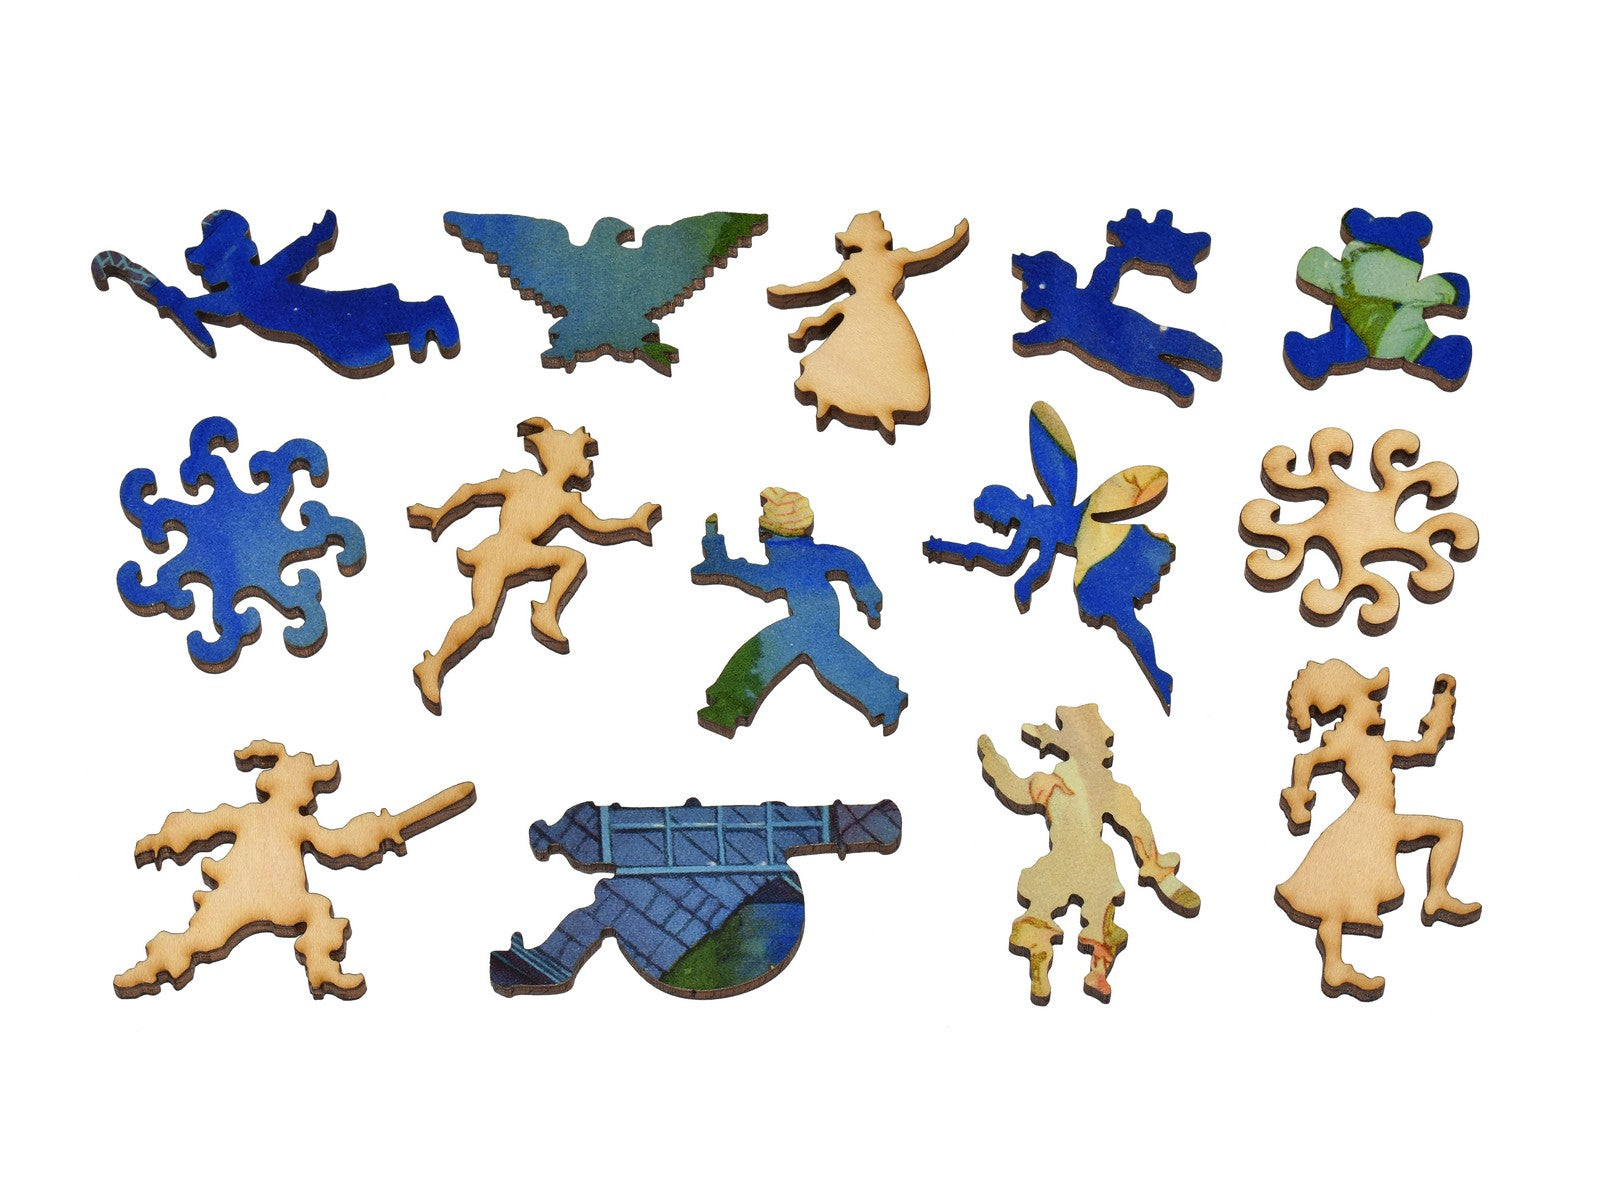 The whimsies that can be found in the puzzle, Peter Pan Flying.